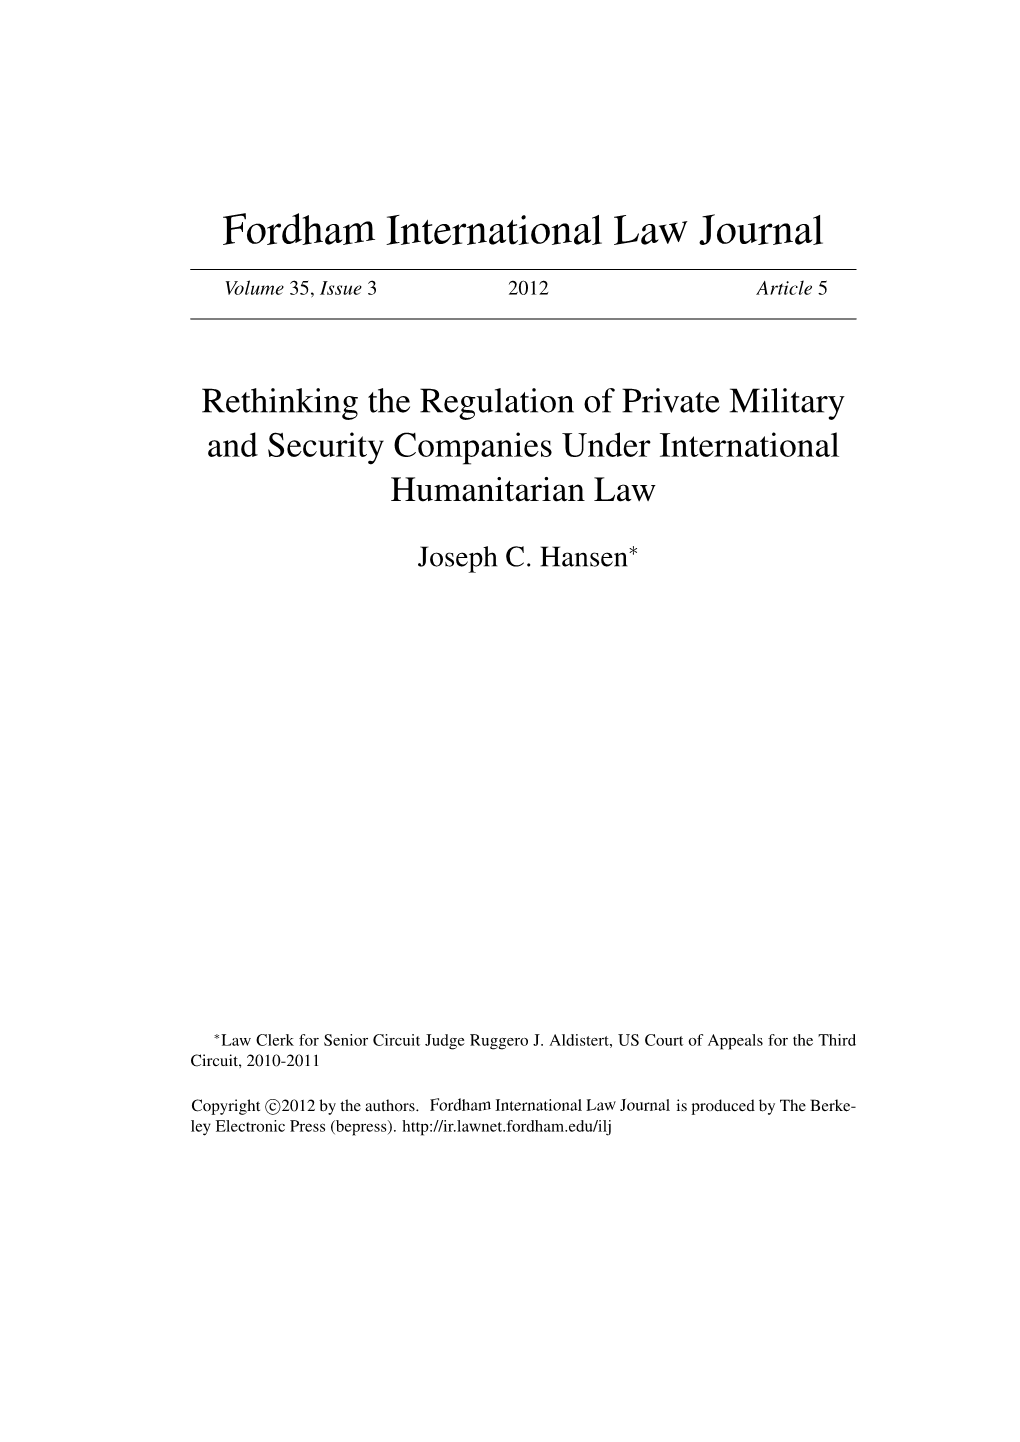 Rethinking the Regulation of Private Military and Security Companies Under International Humanitarian Law